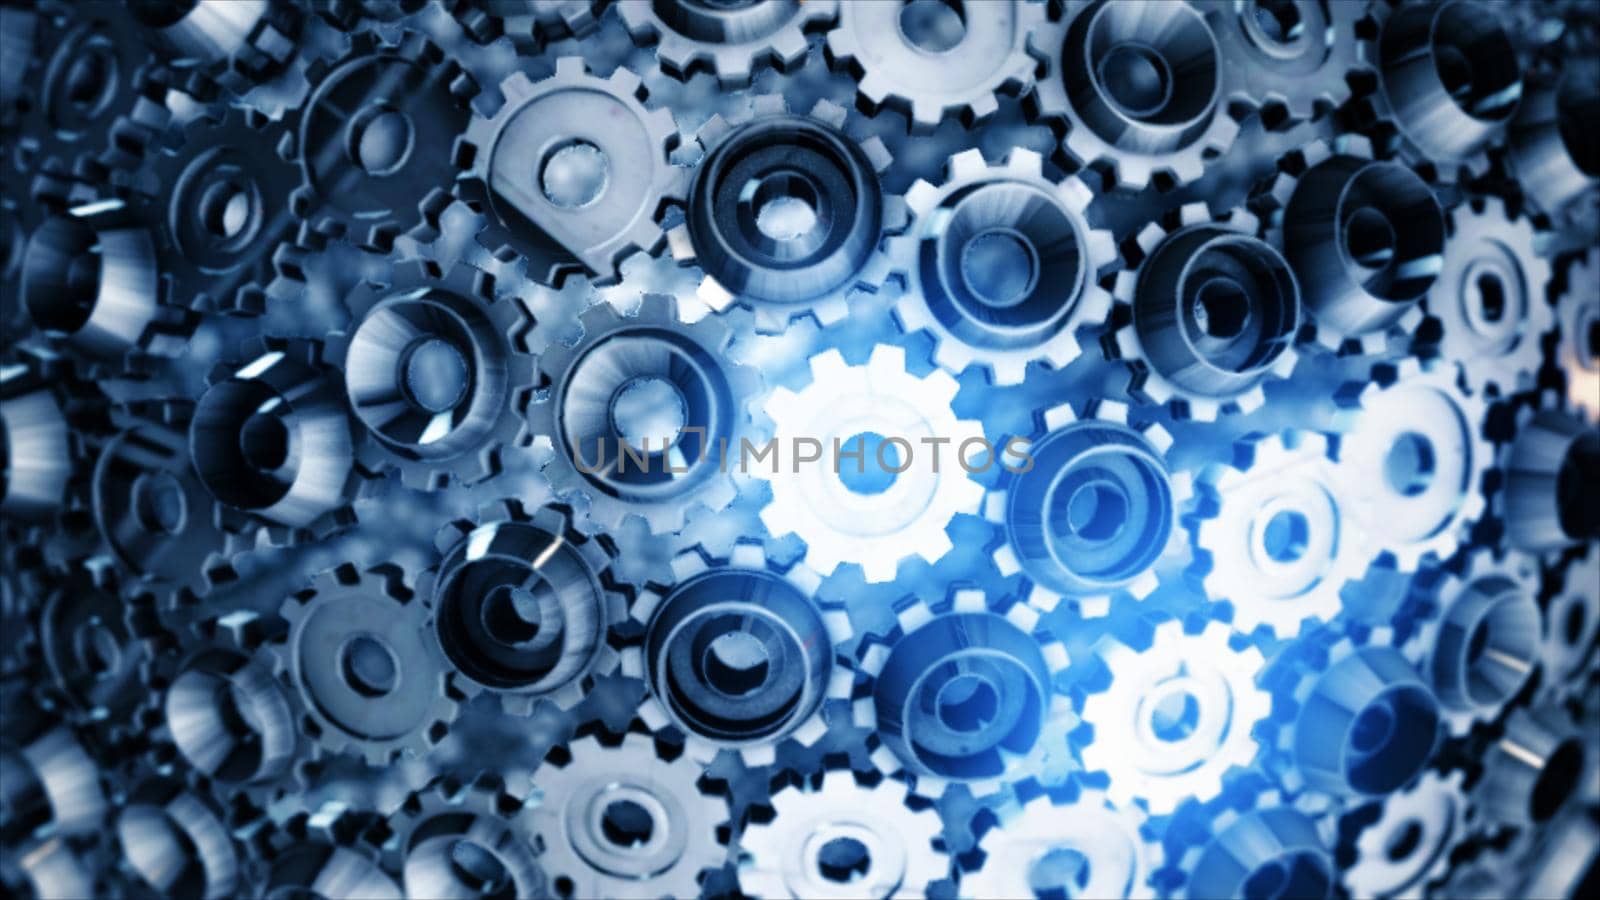 Engine gear wheels, industrial blue background. 3D rendering by designprojects